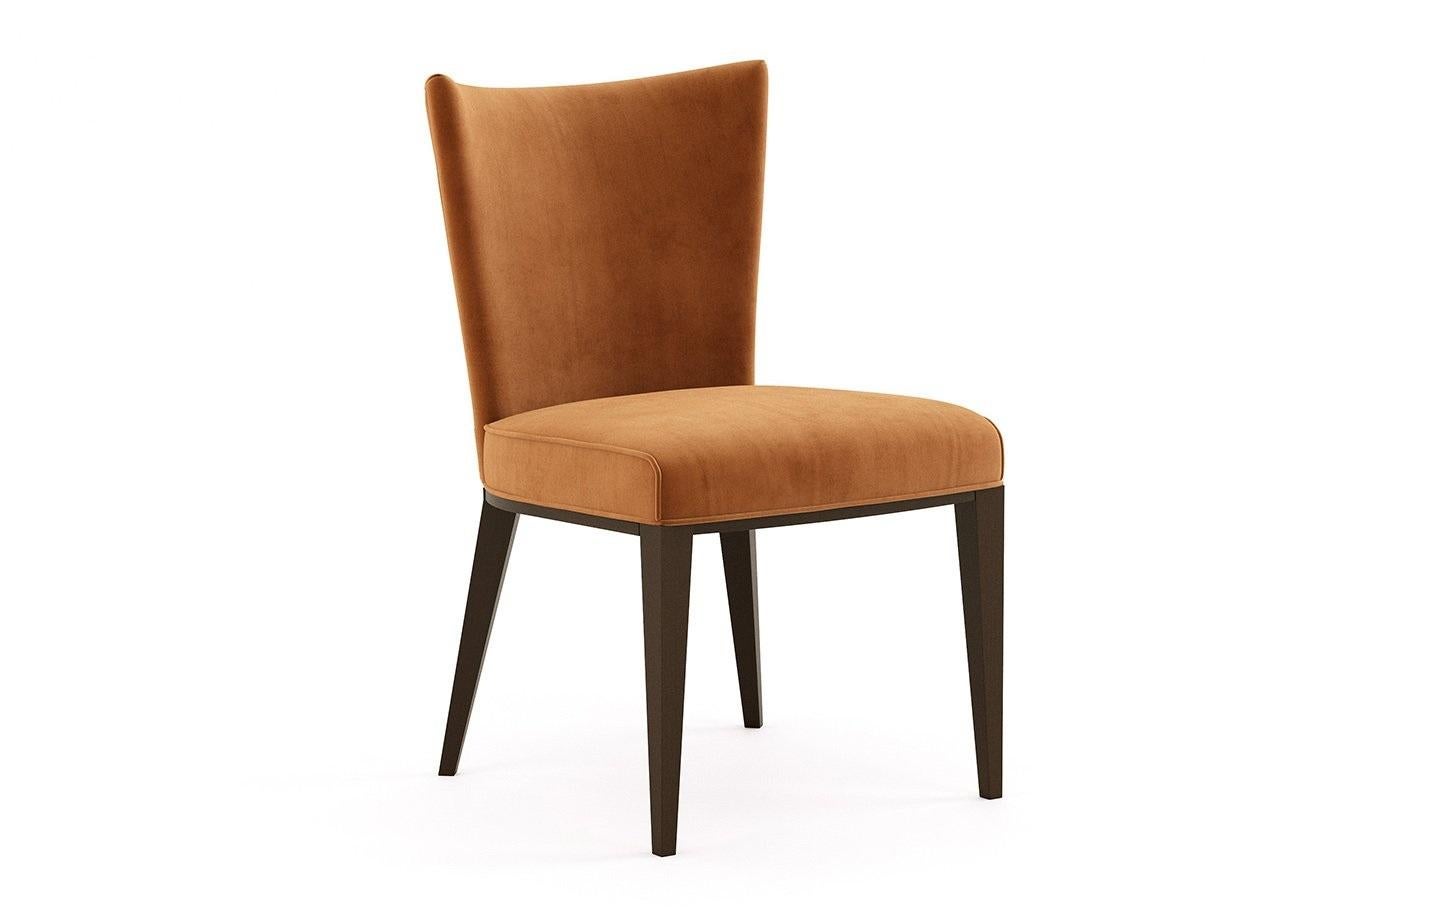 Timeless design in combination with handmade couture techniques. The dining chairs features curved wooden upholstered back for greater comfort. Offered in fumed Oak frame and brick velvet that is resistant to stains and abrasion.
Fabrics: Brick